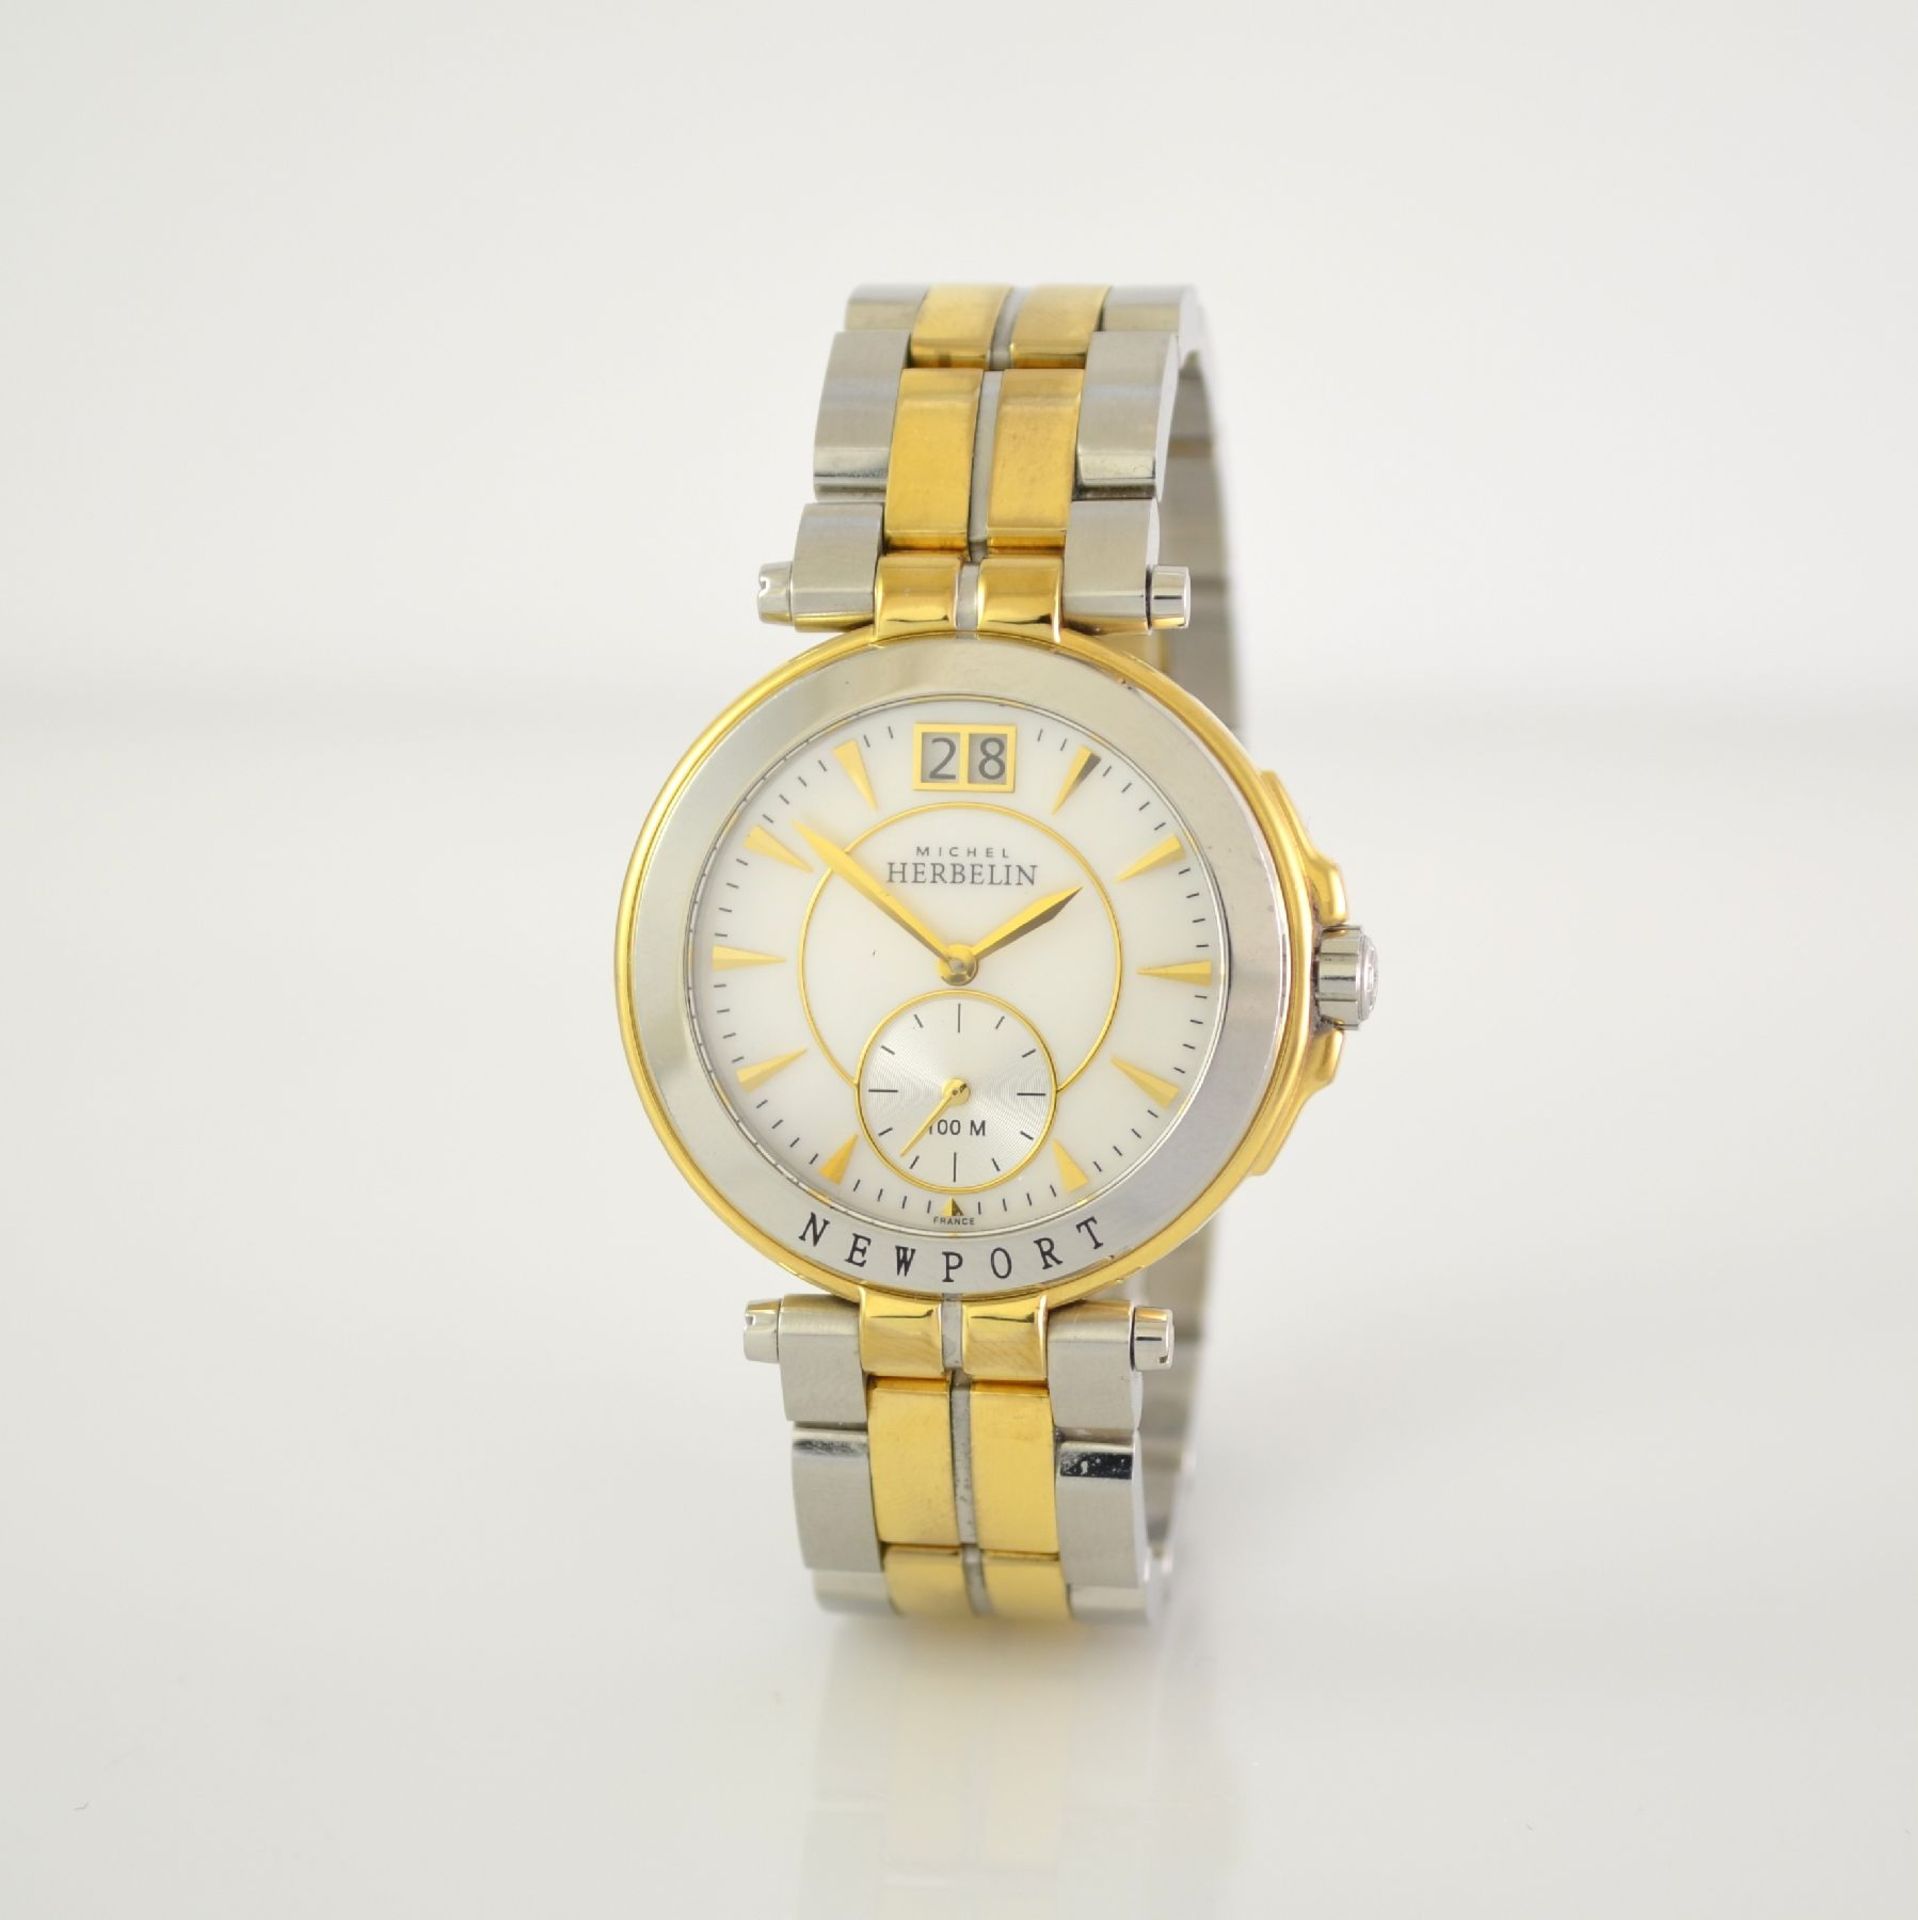 MICHEL HERBELIN ladies wristwatch Newport Yacht Club, France around 2015, reference 18266, stainless - Image 3 of 7